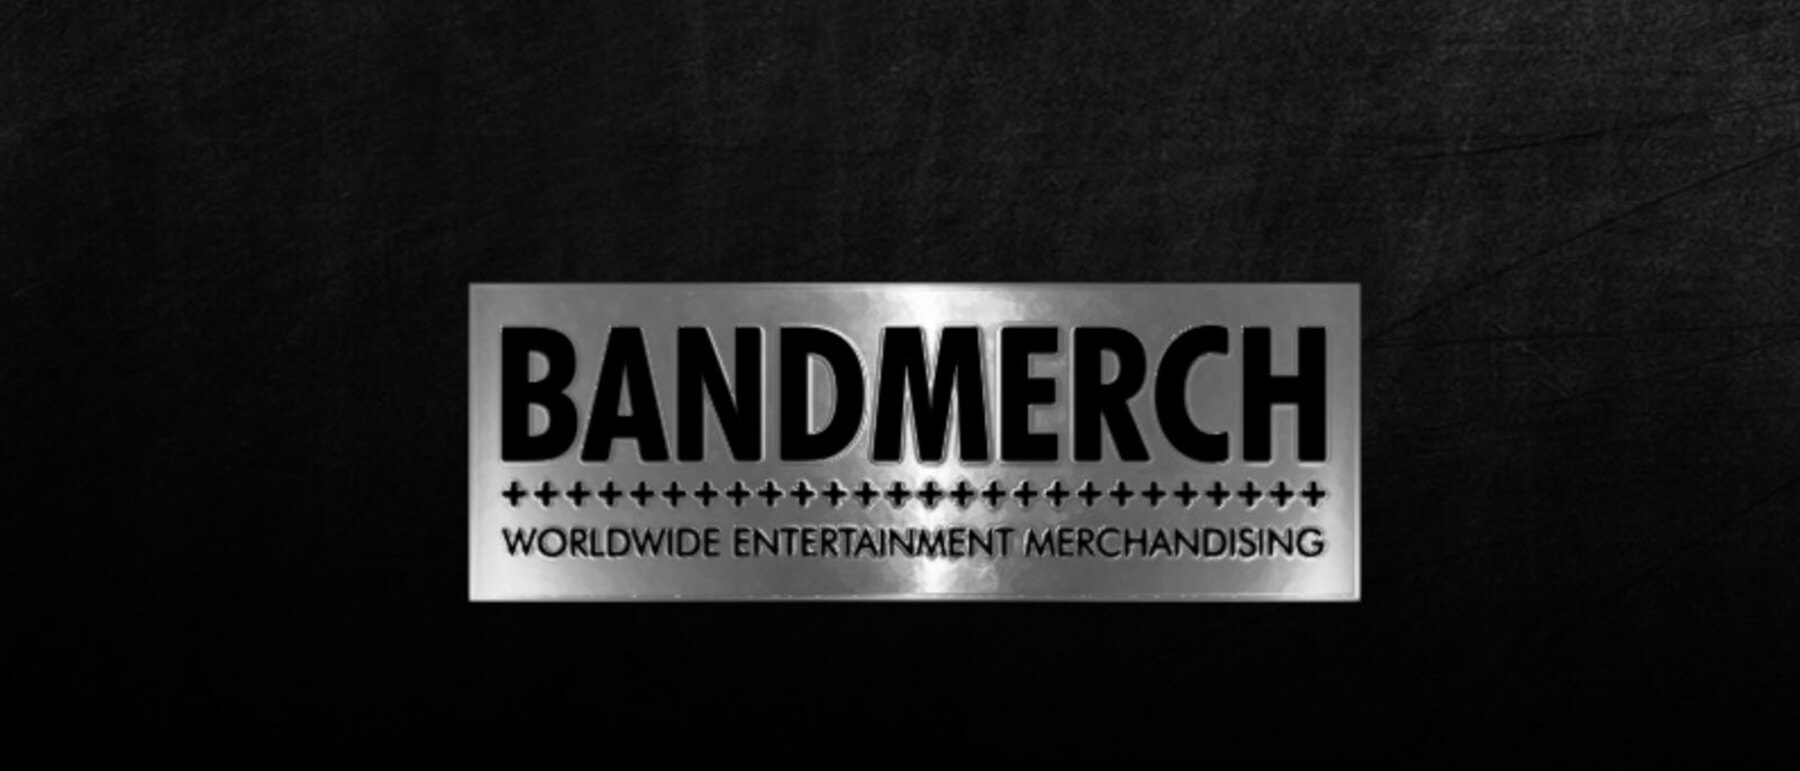 Backbone Capital Assists Transom Capital Group With Financing For The Merger of BandMerch and Cinder Block to Create Largest Independent Merchandising Company in United States